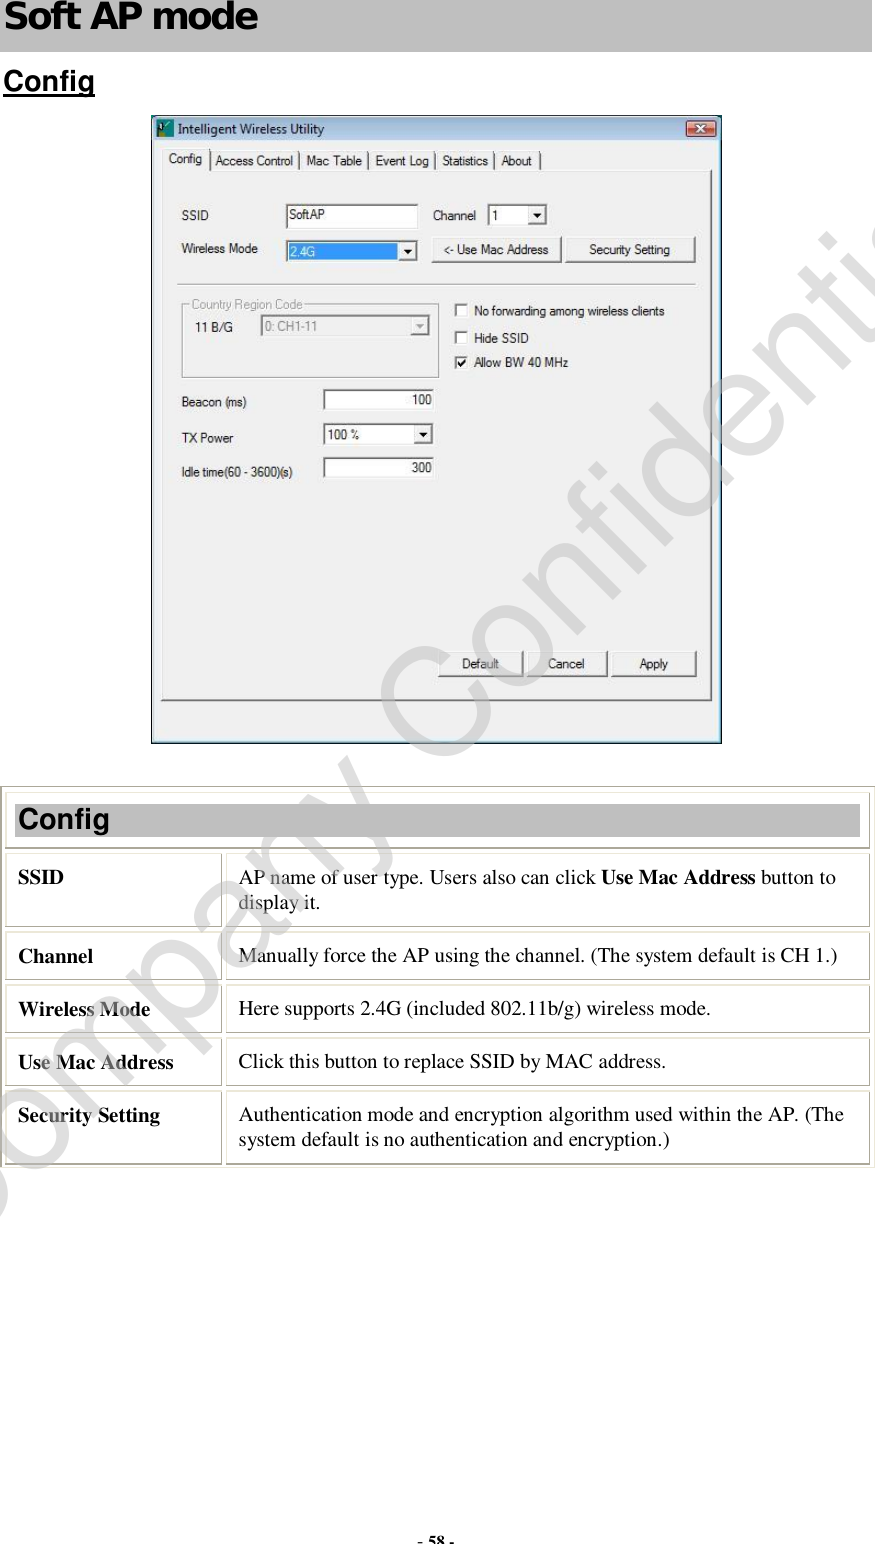  - 58 - Soft AP mode Config   Config SSID   AP name of user type. Users also can click Use Mac Address button to display it.  Channel  Manually force the AP using the channel. (The system default is CH 1.) Wireless Mode  Here supports 2.4G (included 802.11b/g) wireless mode. Use Mac Address  Click this button to replace SSID by MAC address. Security Setting  Authentication mode and encryption algorithm used within the AP. (The system default is no authentication and encryption.) Company Confidential